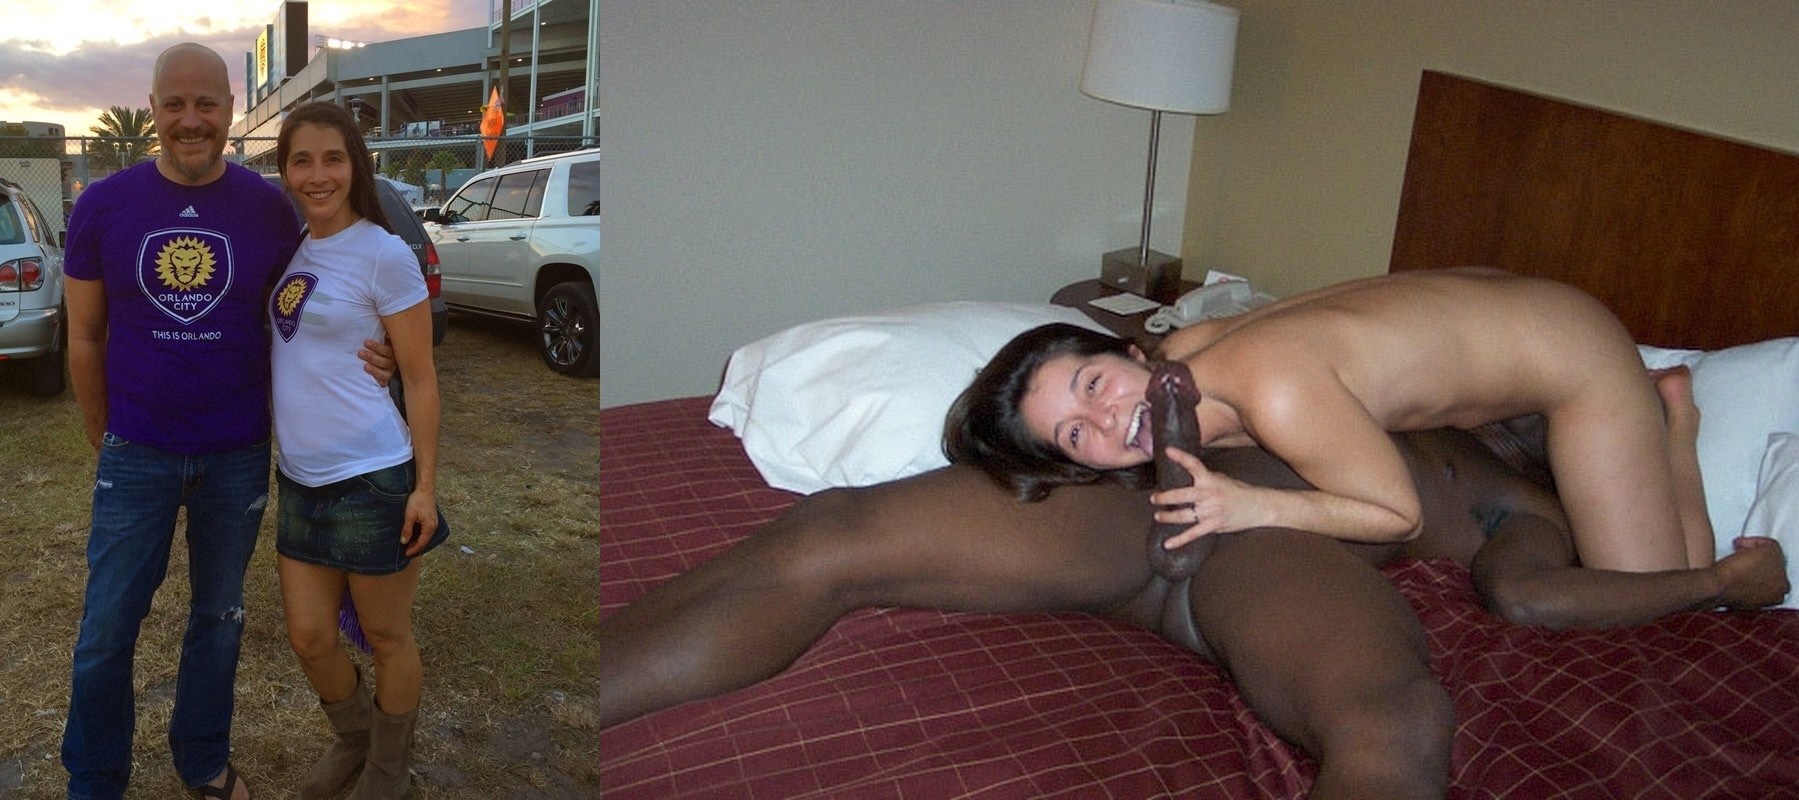 Archive of the Wife and Her Fuck on a Business Trip (67 photos) picture